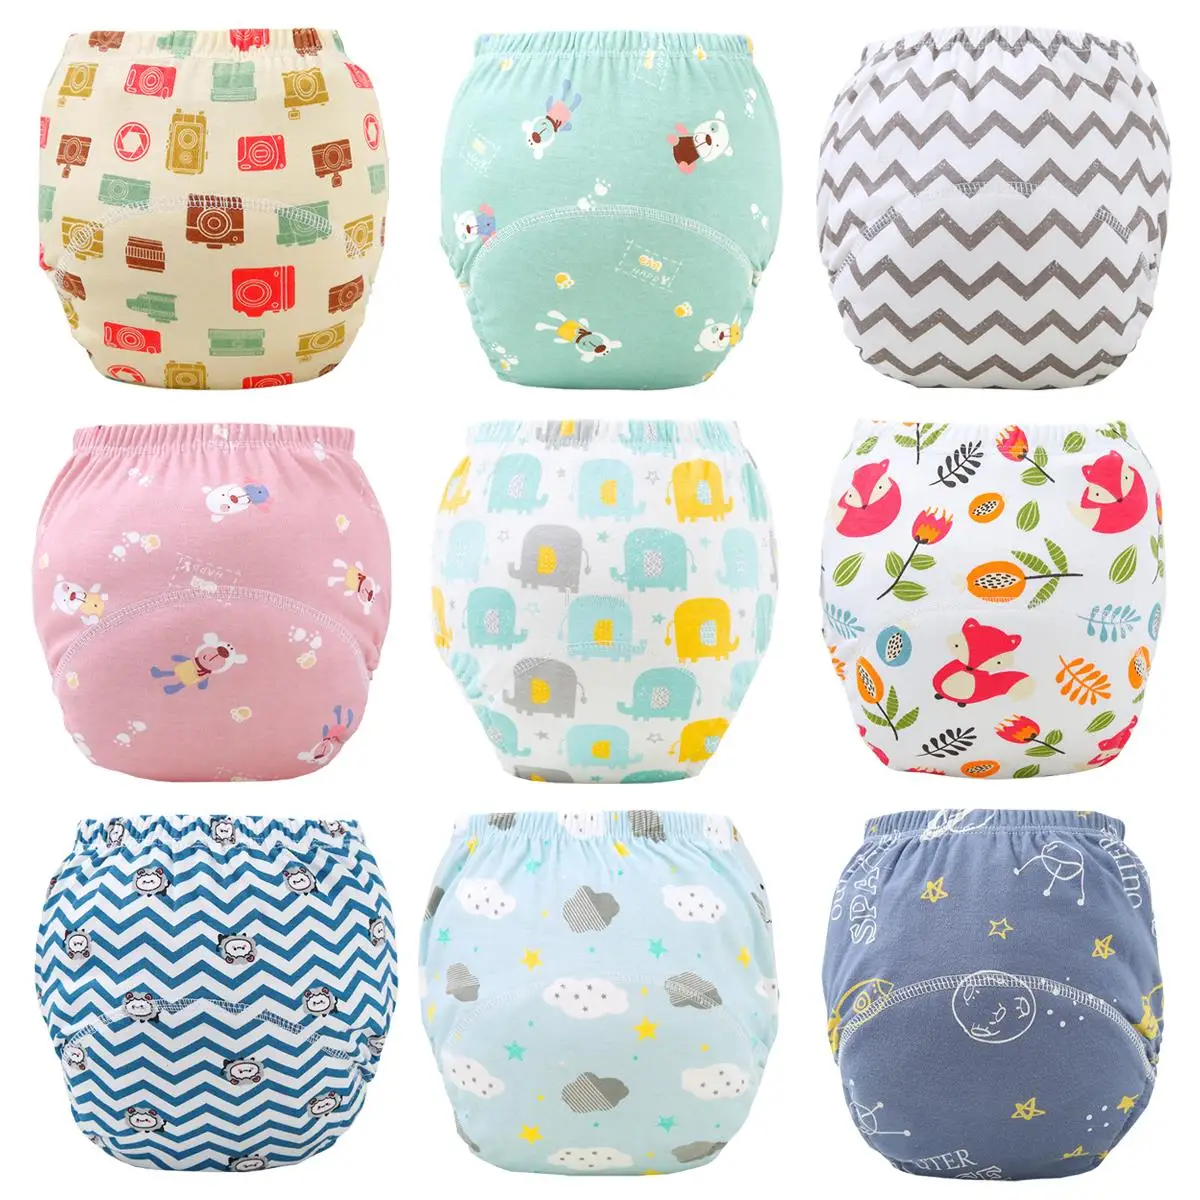 4Pcs/Lot Baby Cloth Diapers Reusable Training Pants Cotton Waterproof Washable Underwear For Children Toddler Kid Bebe Nappy